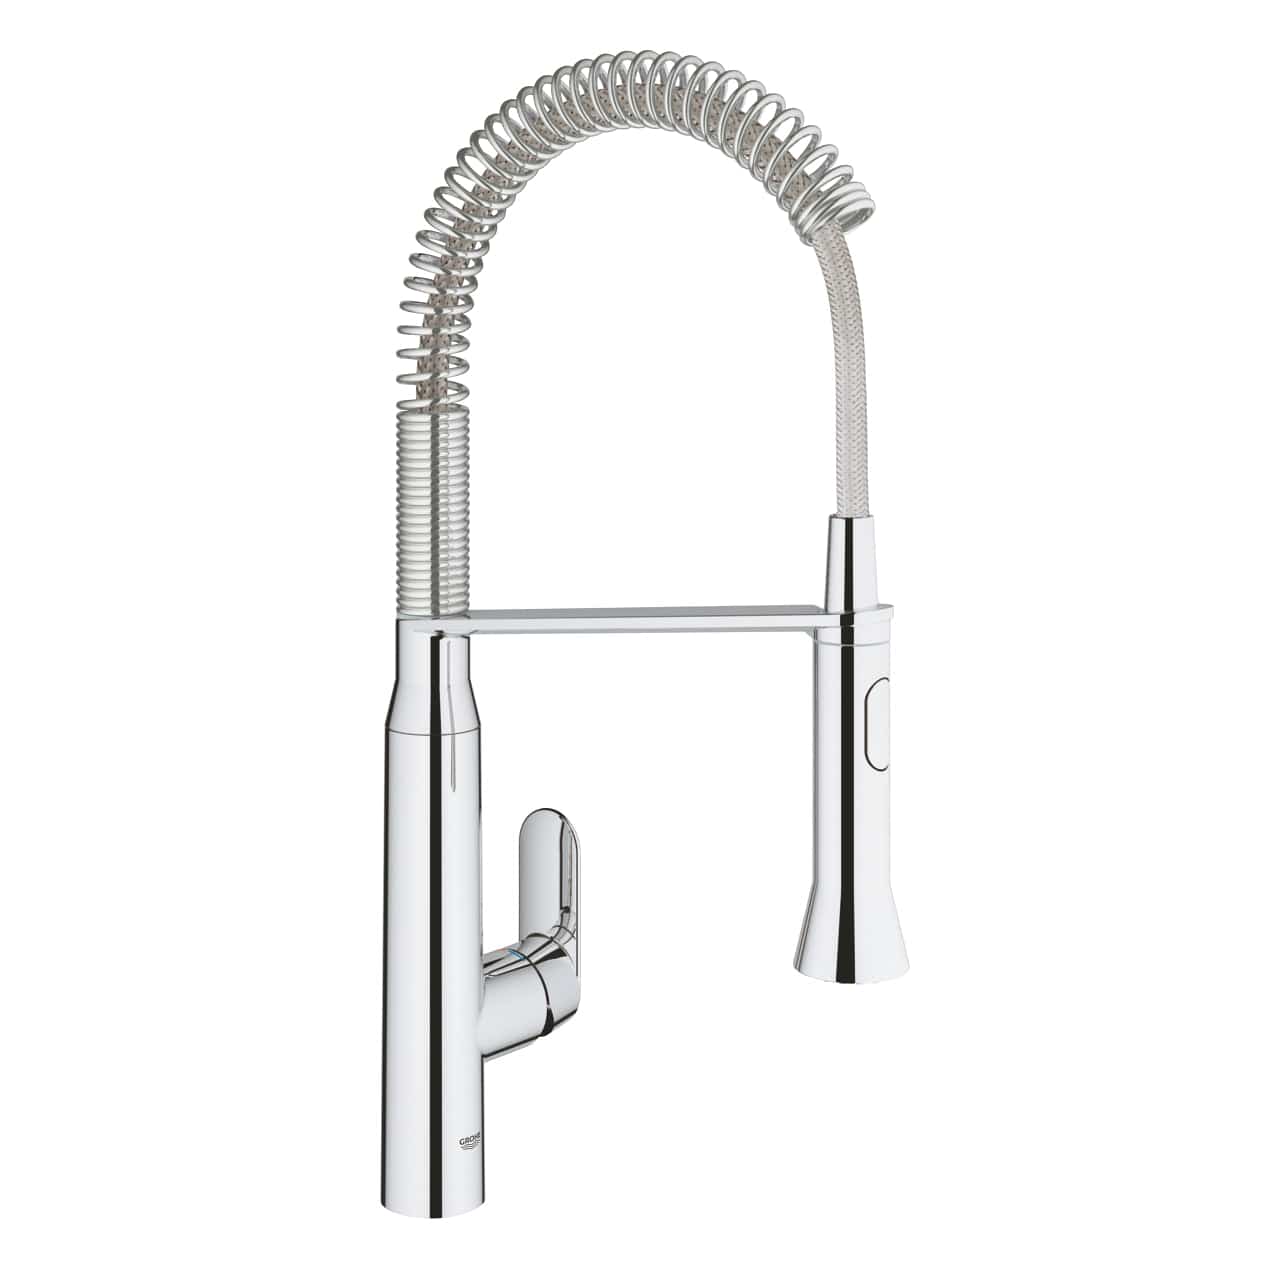 Grohe K7 Single-Lever Sink Mixer | Supply Master | Accra, Ghana Kitchen Tap Buy Tools hardware Building materials